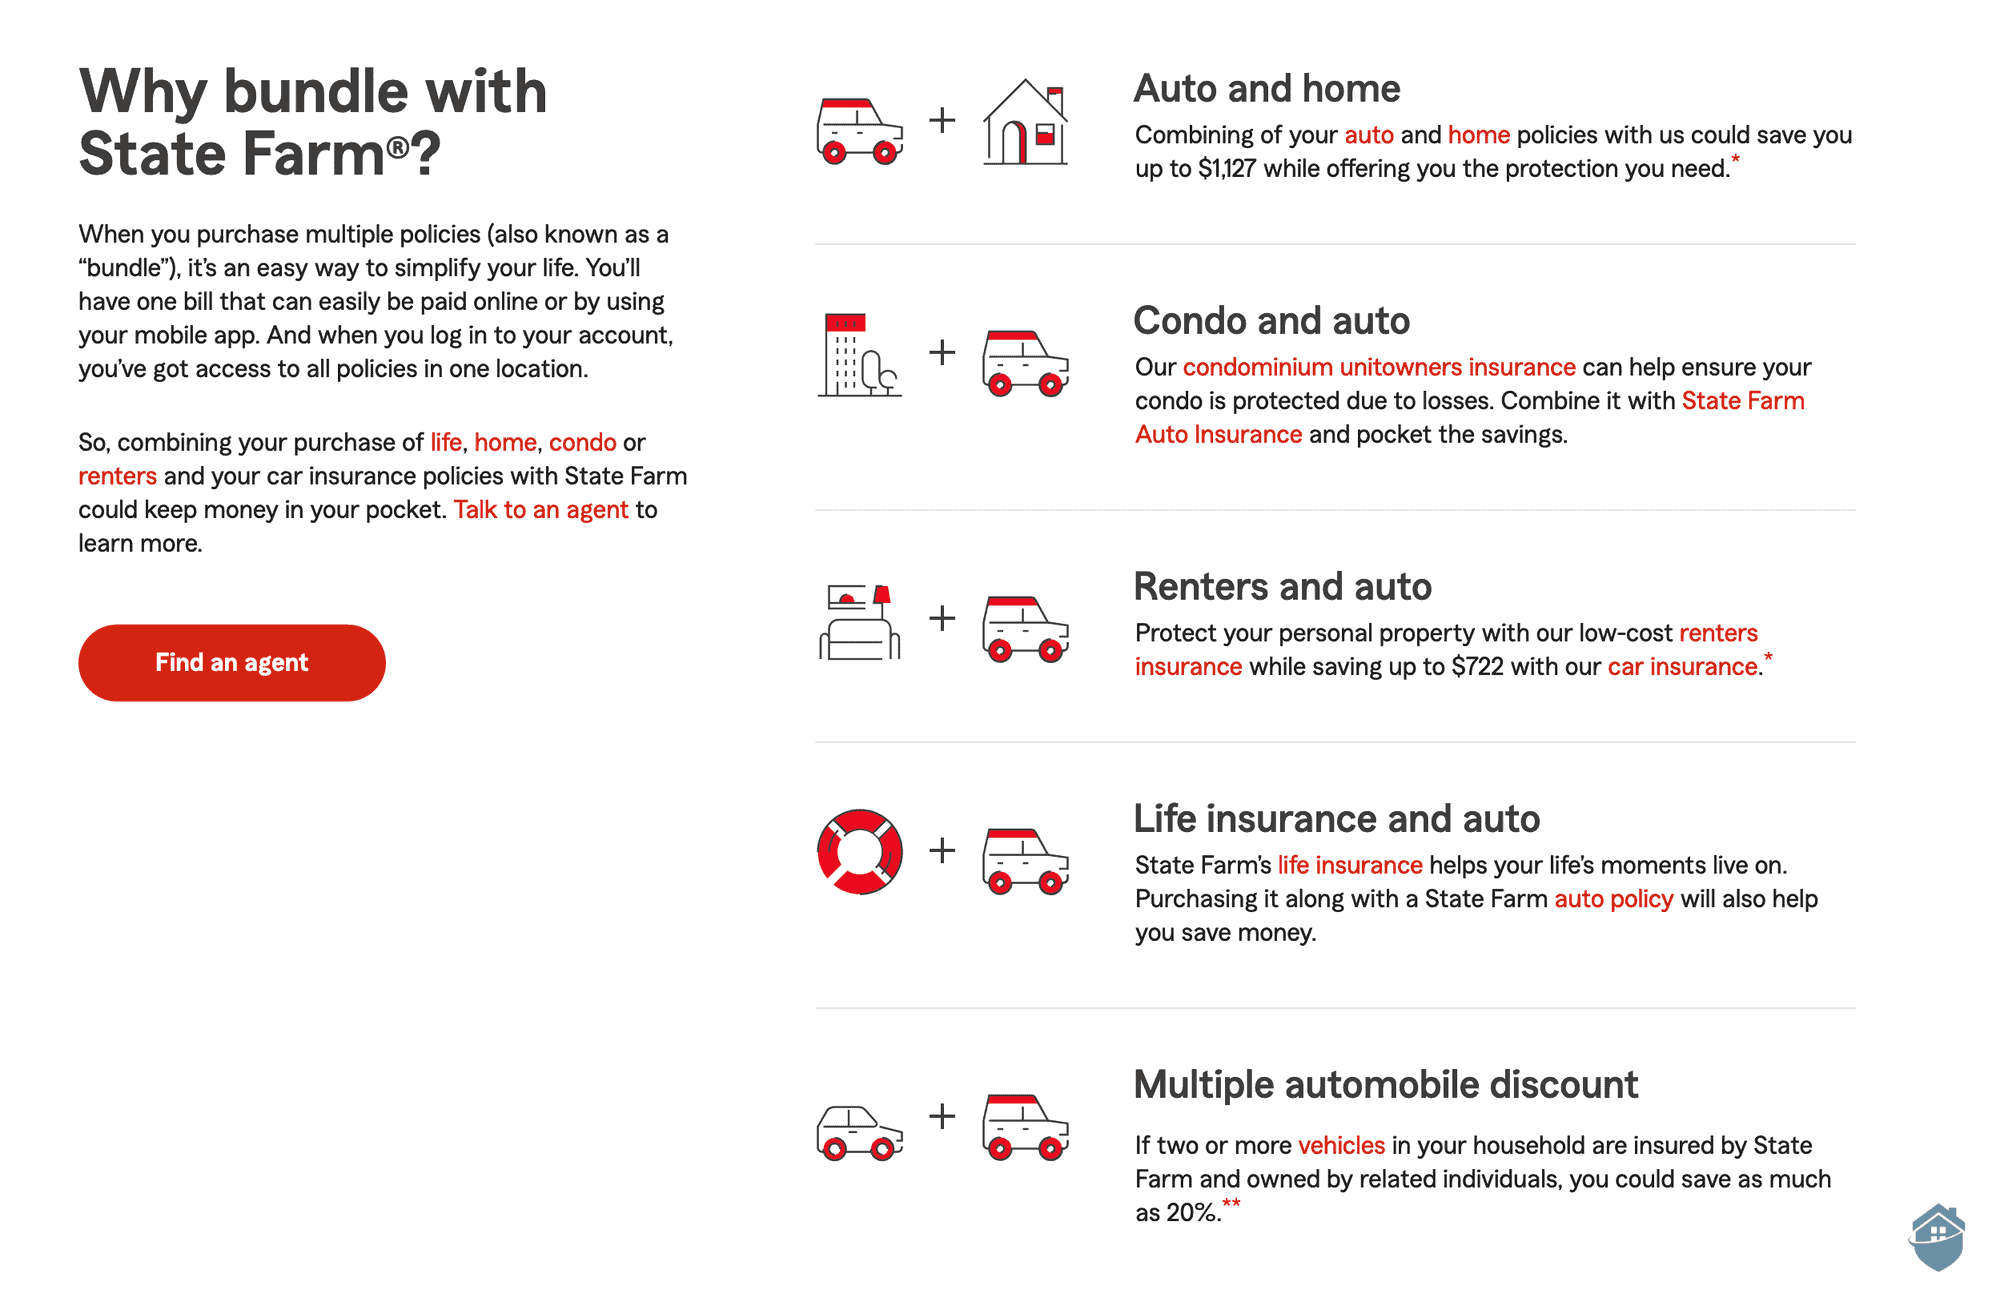 Some of the bundling options offered by State Farm.